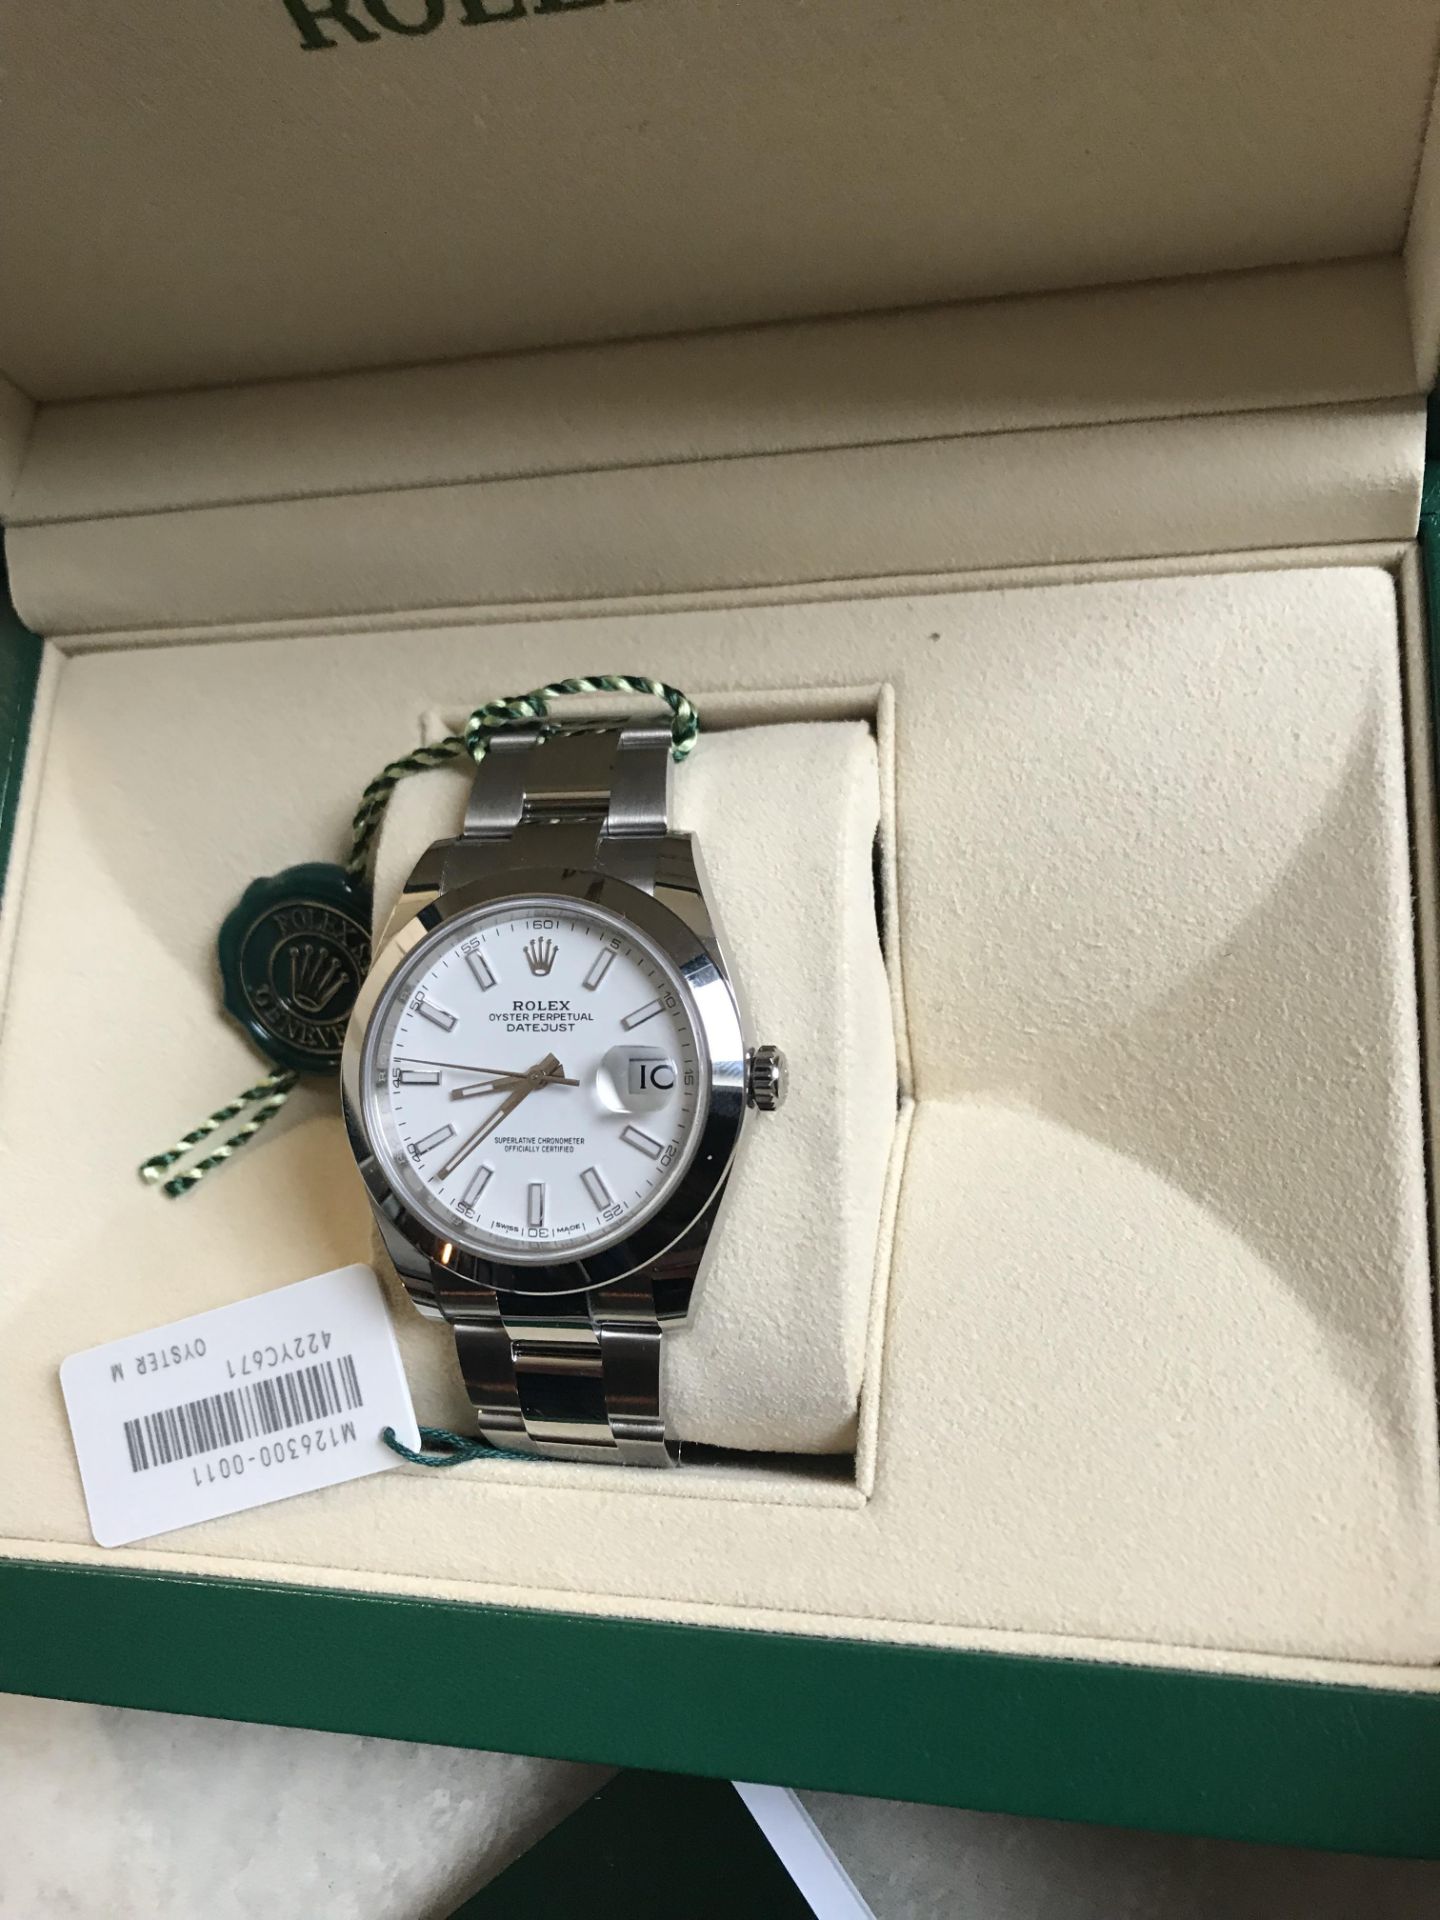 2019 ROLEX DATEJUST 41 WHITE OYSTERSTEEL 41 MM - Image 12 of 13